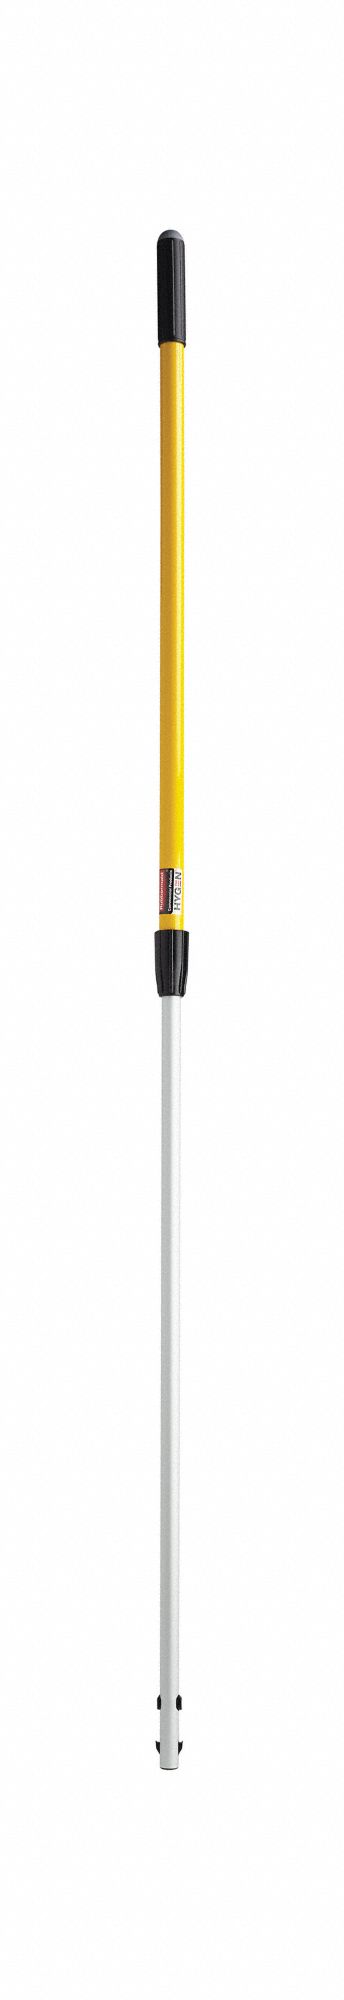 Rubbermaid FGQ75500YL00 HYGEN Quick-Connect Straight Extension Mop Handle Yellow for sale online 